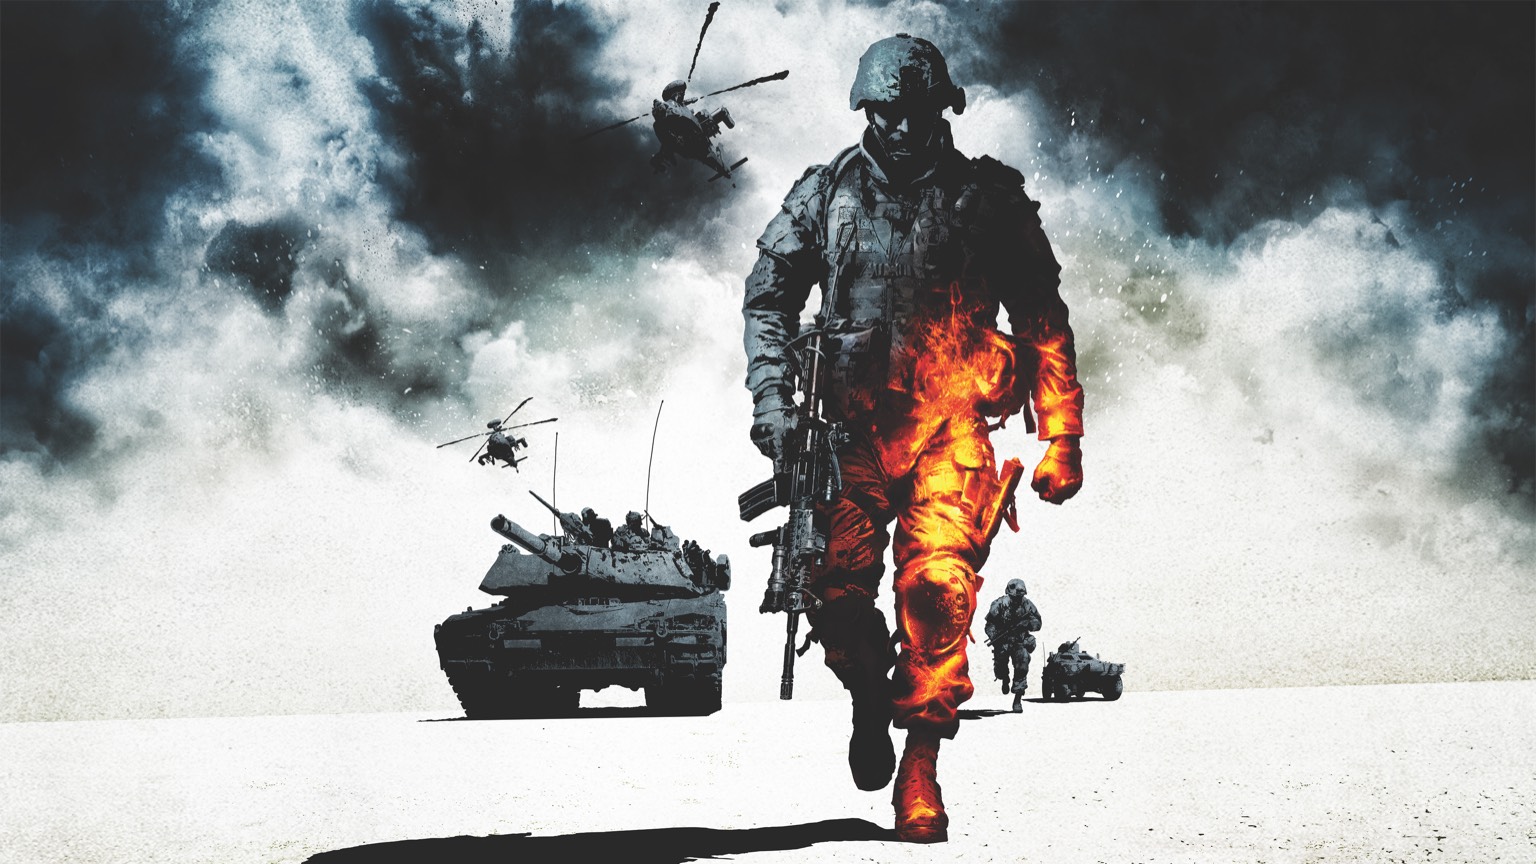  Battlefield 2 Bad Company Game Download for PC